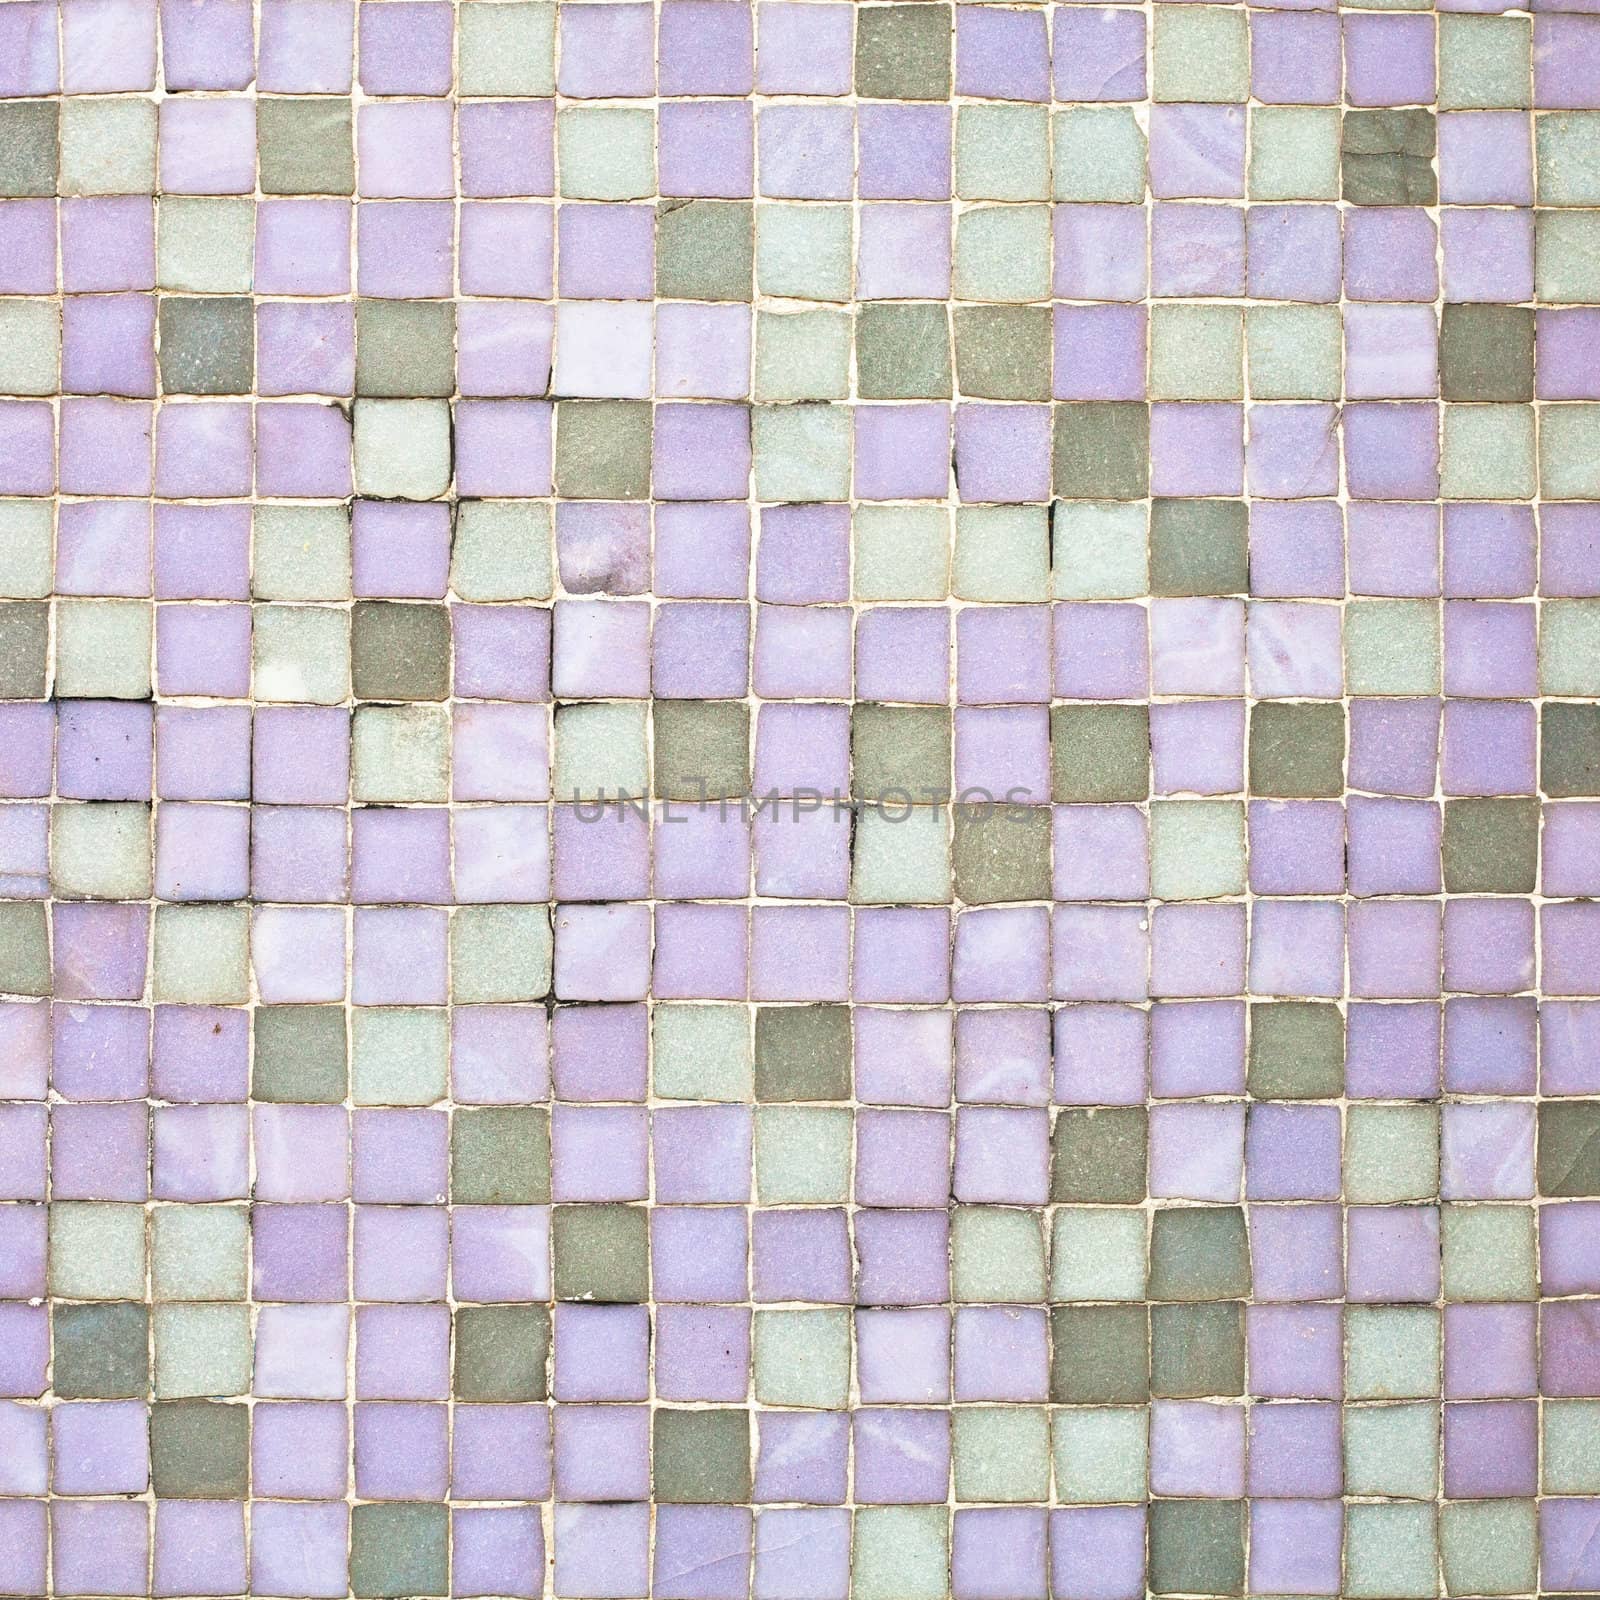 Purple and grey  tiles as a background image